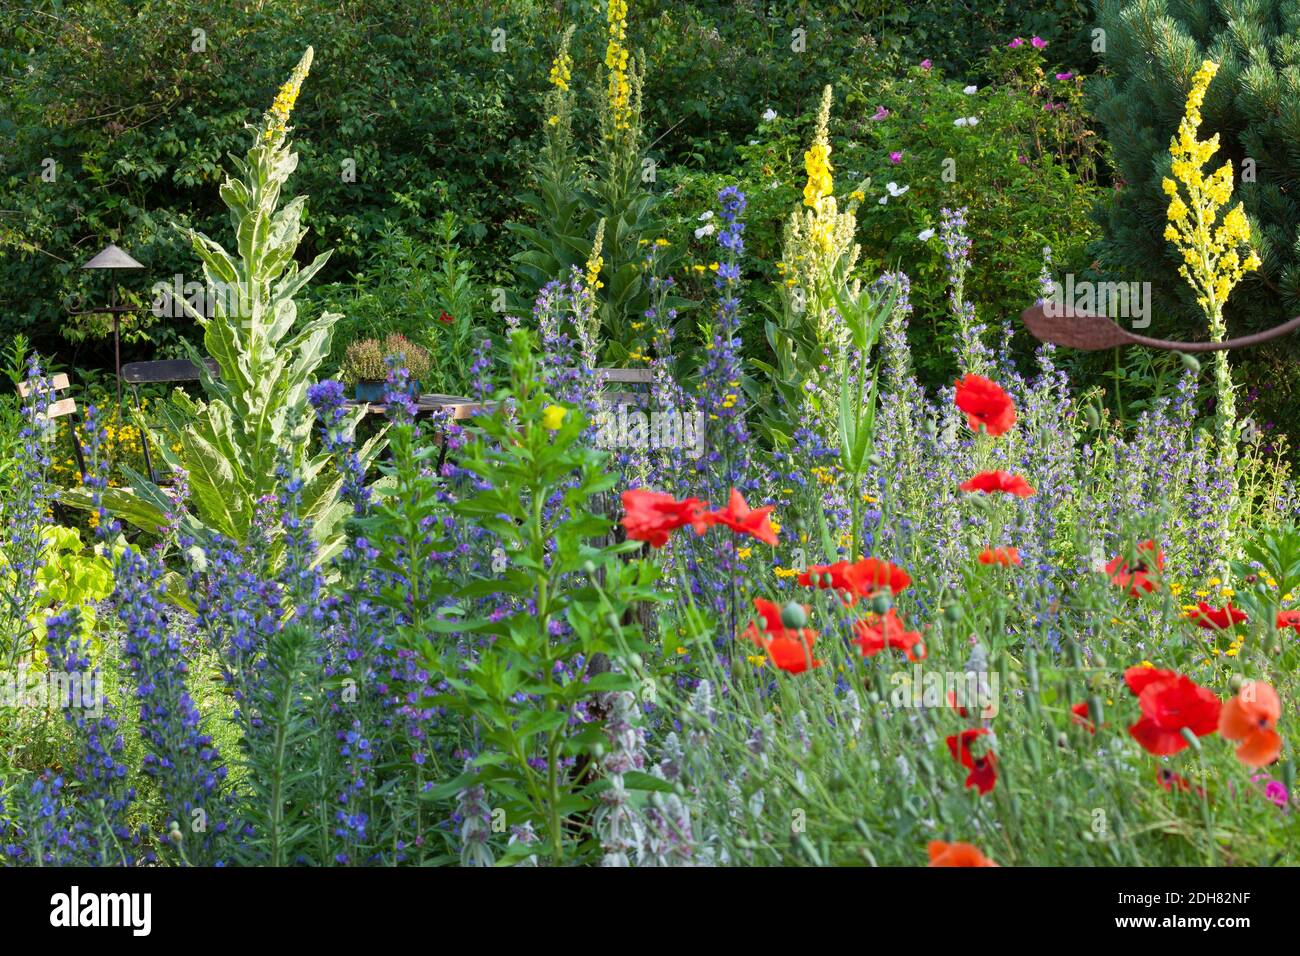 mullein (Verbascum spec.), insect-friendly flower-rich nature garden, Germany Stock Photo